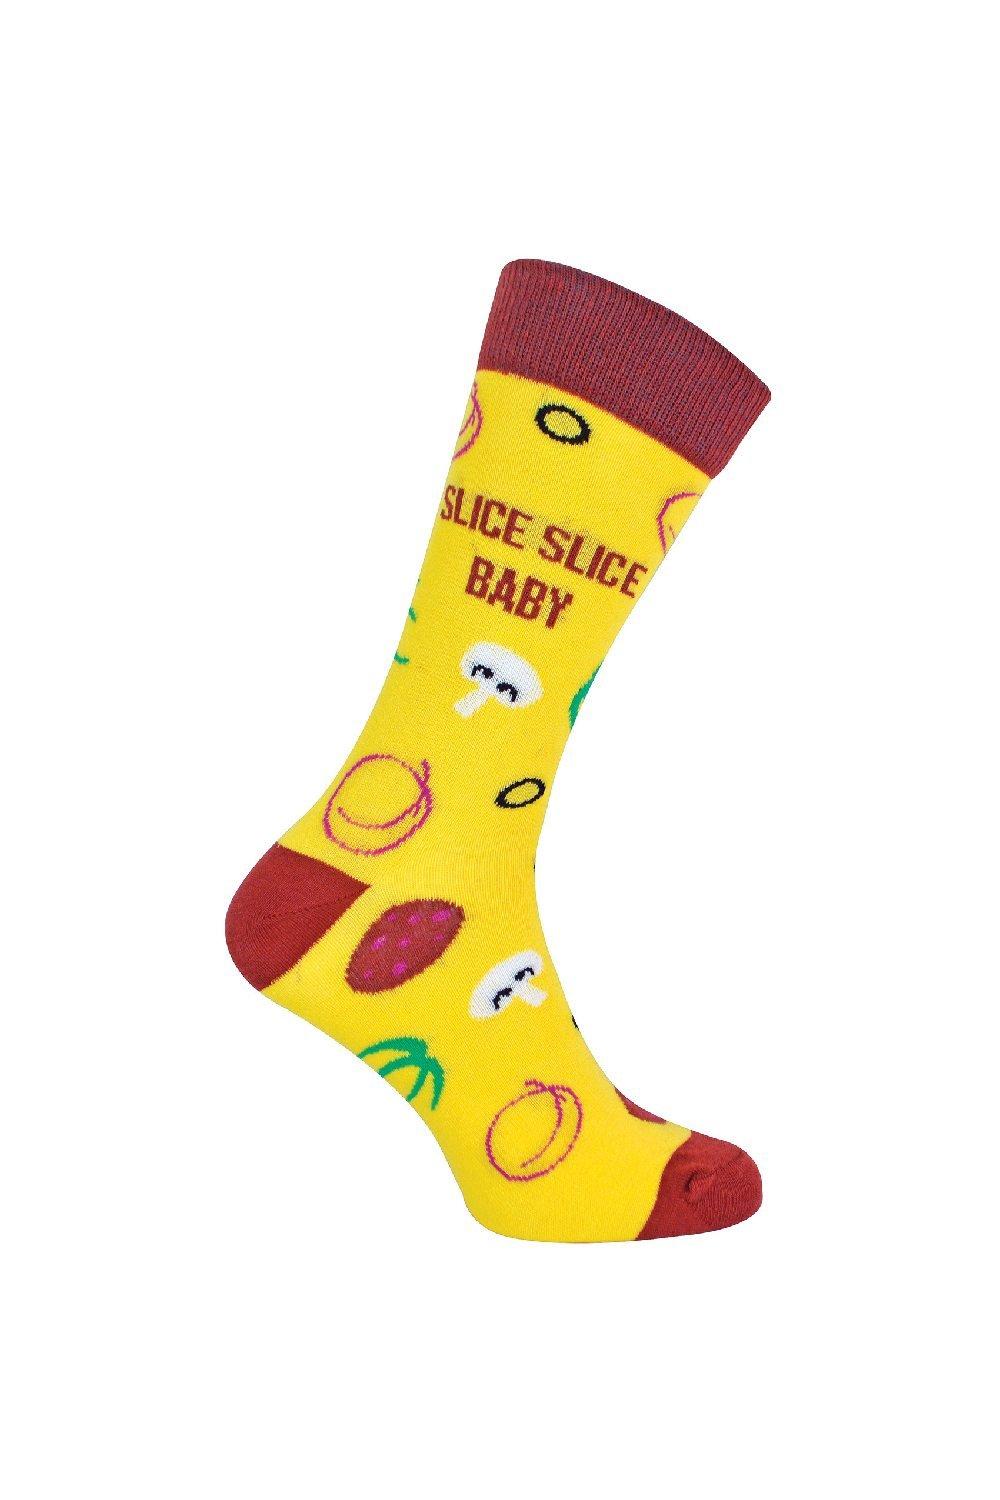 Novelty Funky Pizza Design Cotton Rich Socks in a Gift Box